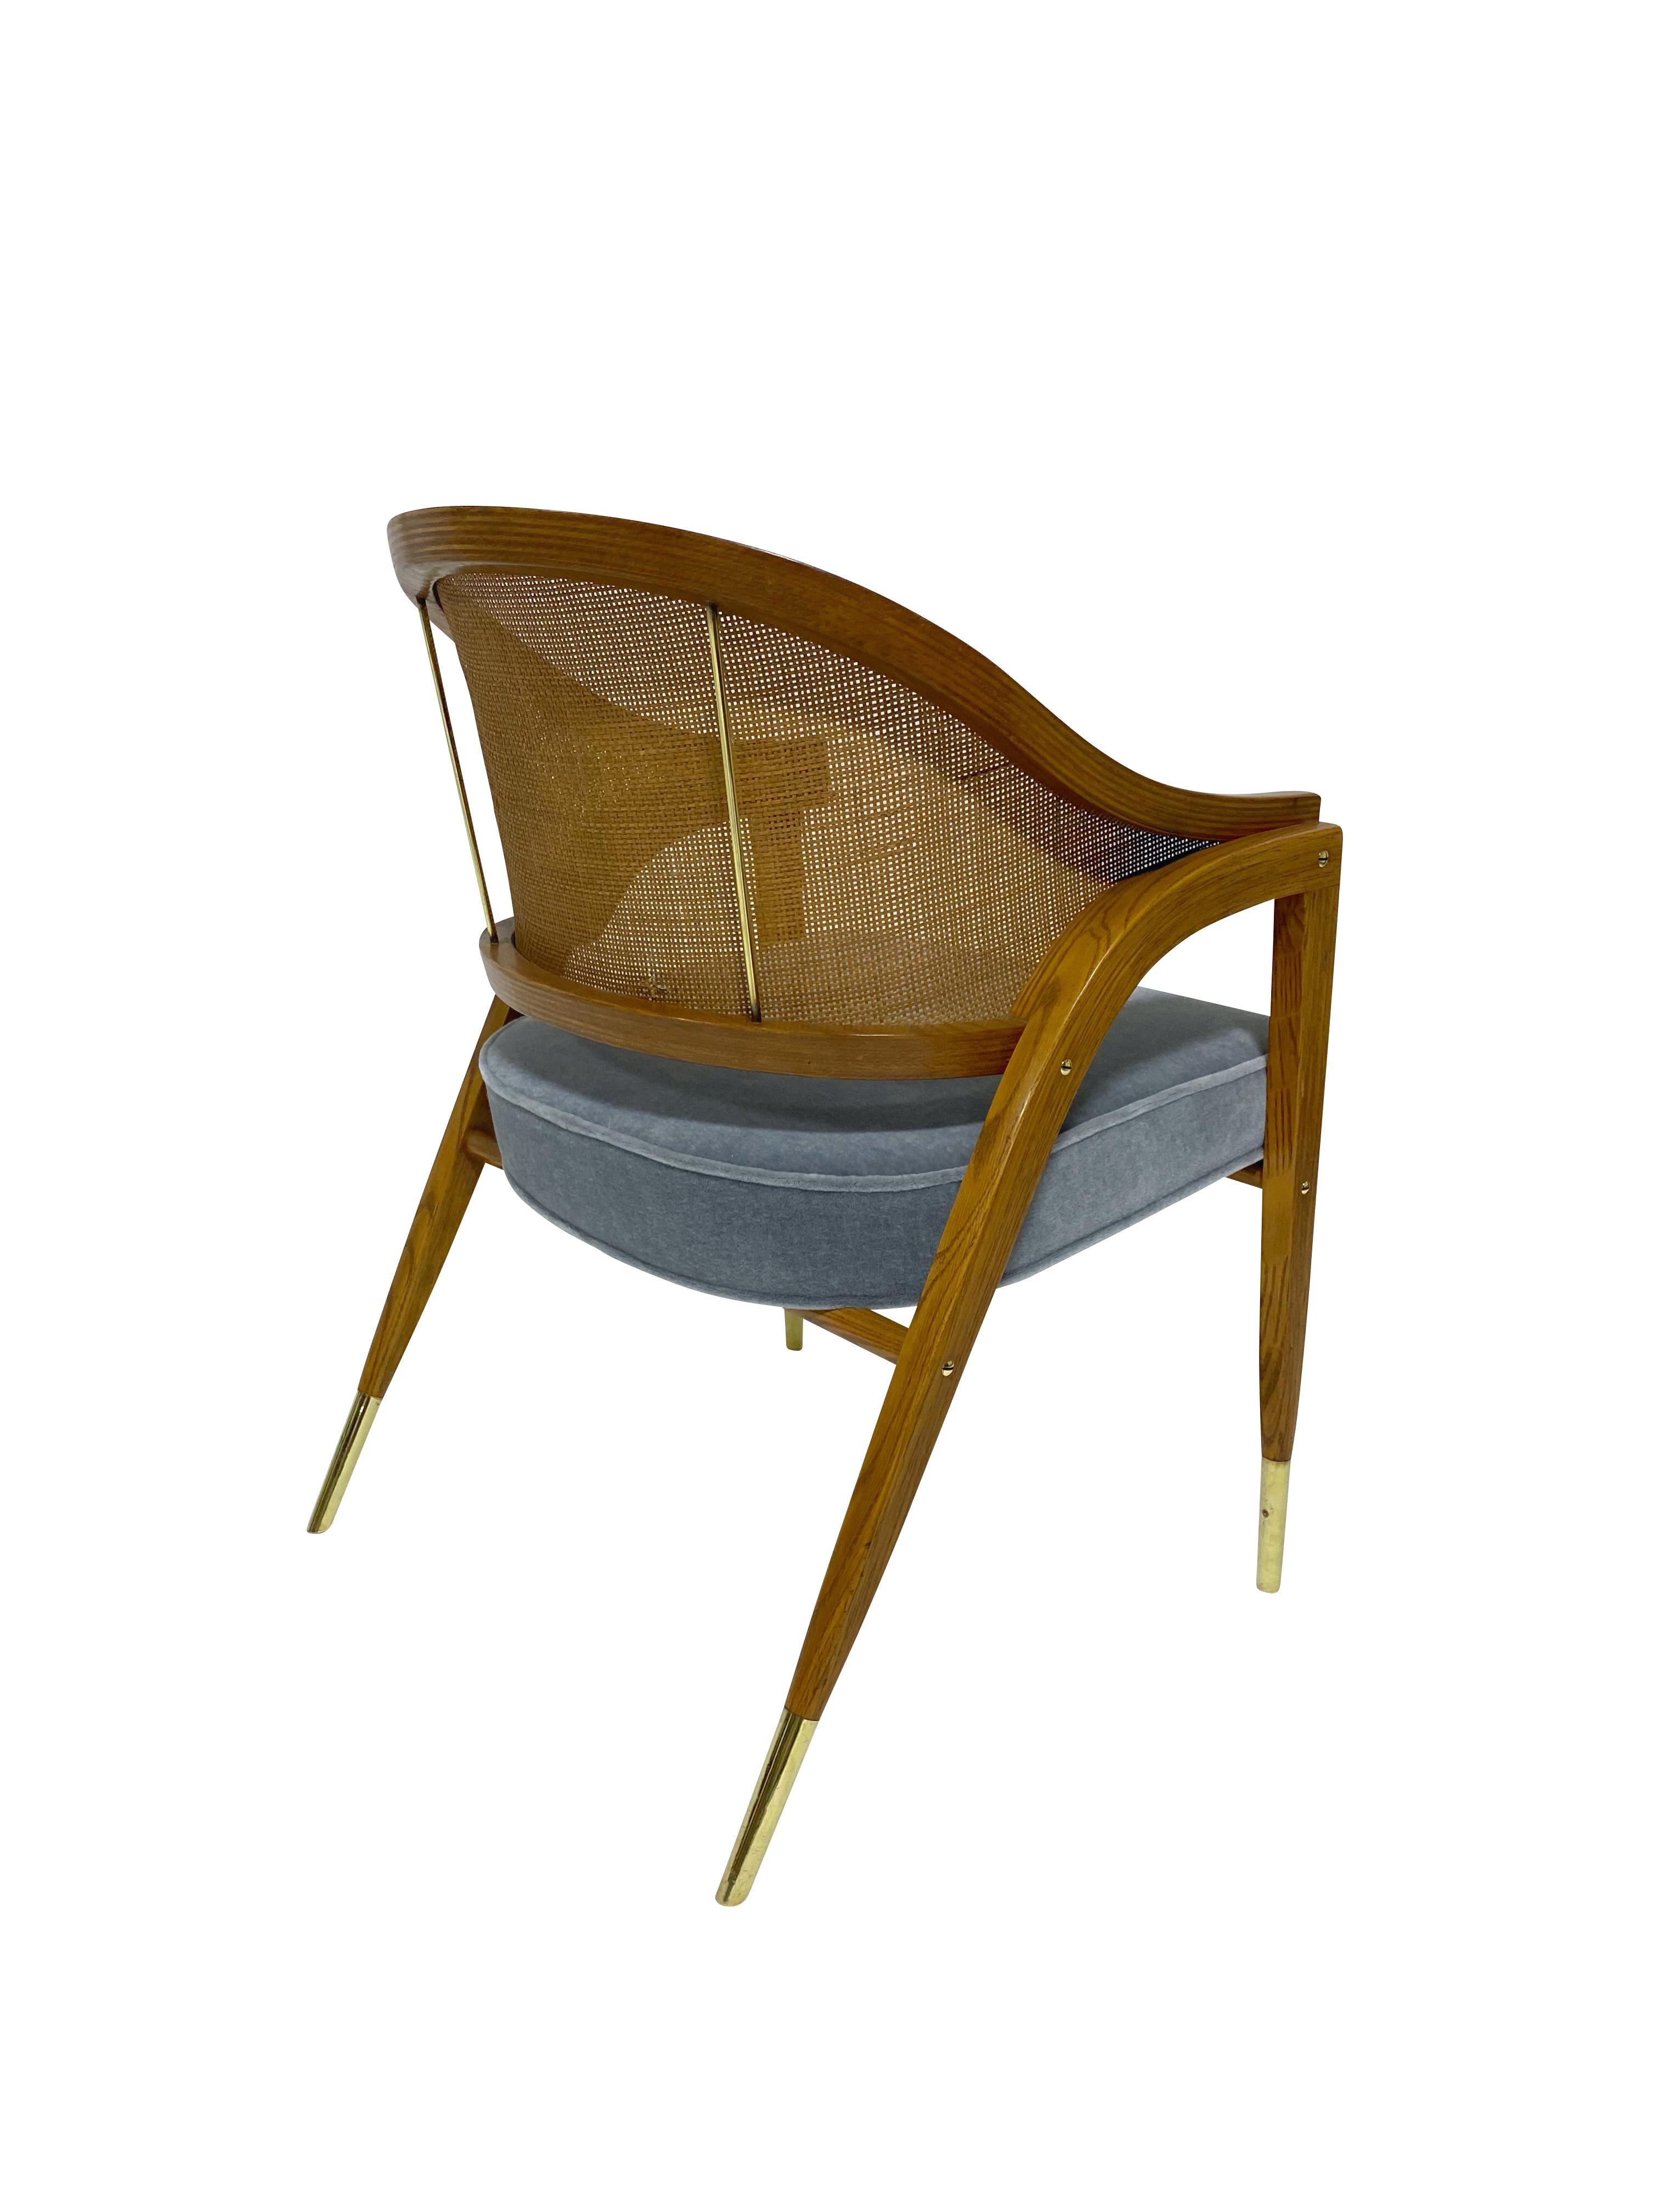 Armchair designed by Edward Wormley for Dunbar. Sculptural form frame made of laminated layers of ash with brass hardware, cane back, and newly upholstered mohair seat.